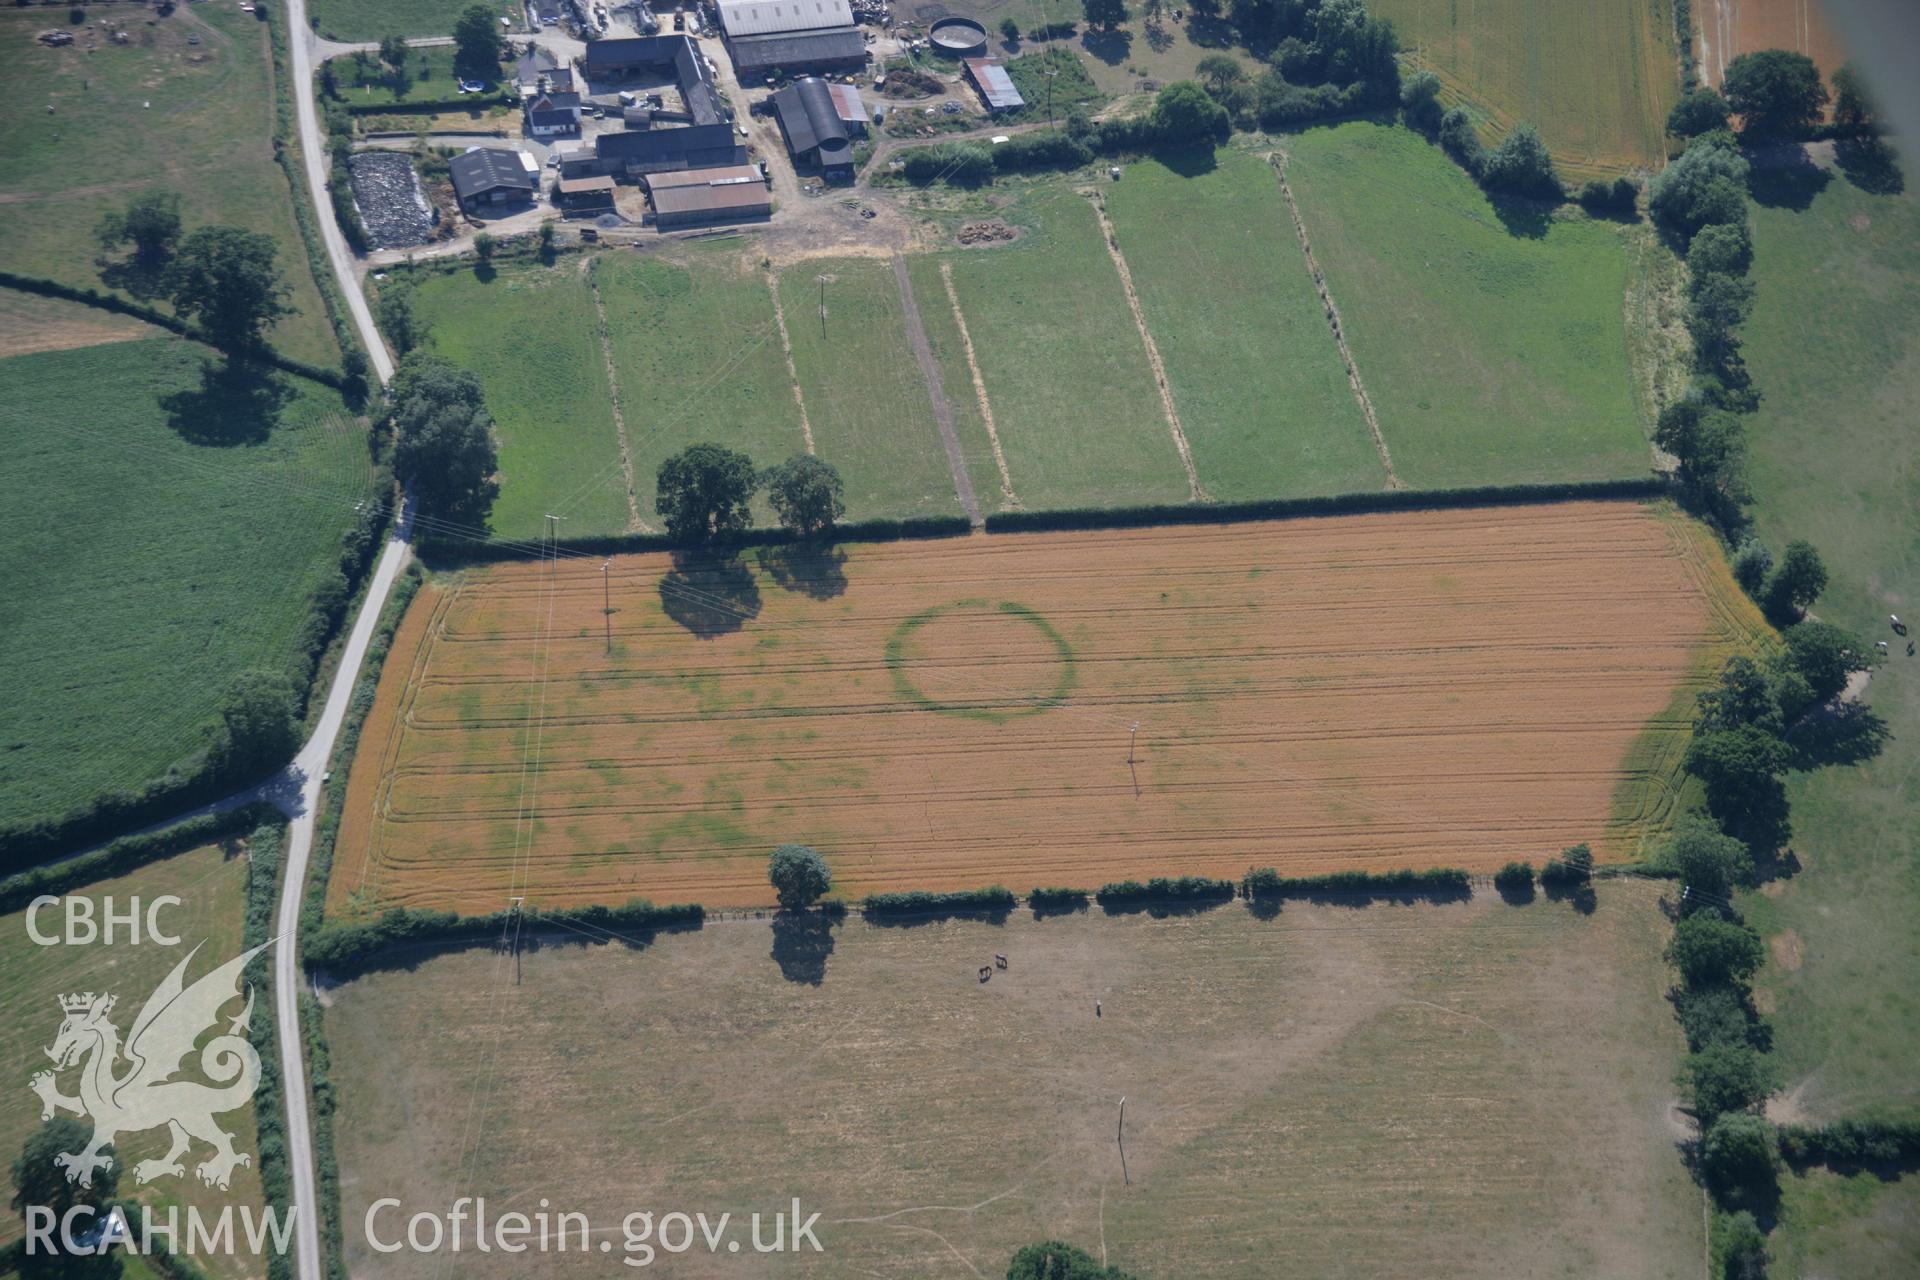 RCAHMW colour oblique aerial photograph of Four Crosses Barrow Cemetery, Site 7. Taken on 17 July 2006 by Toby Driver